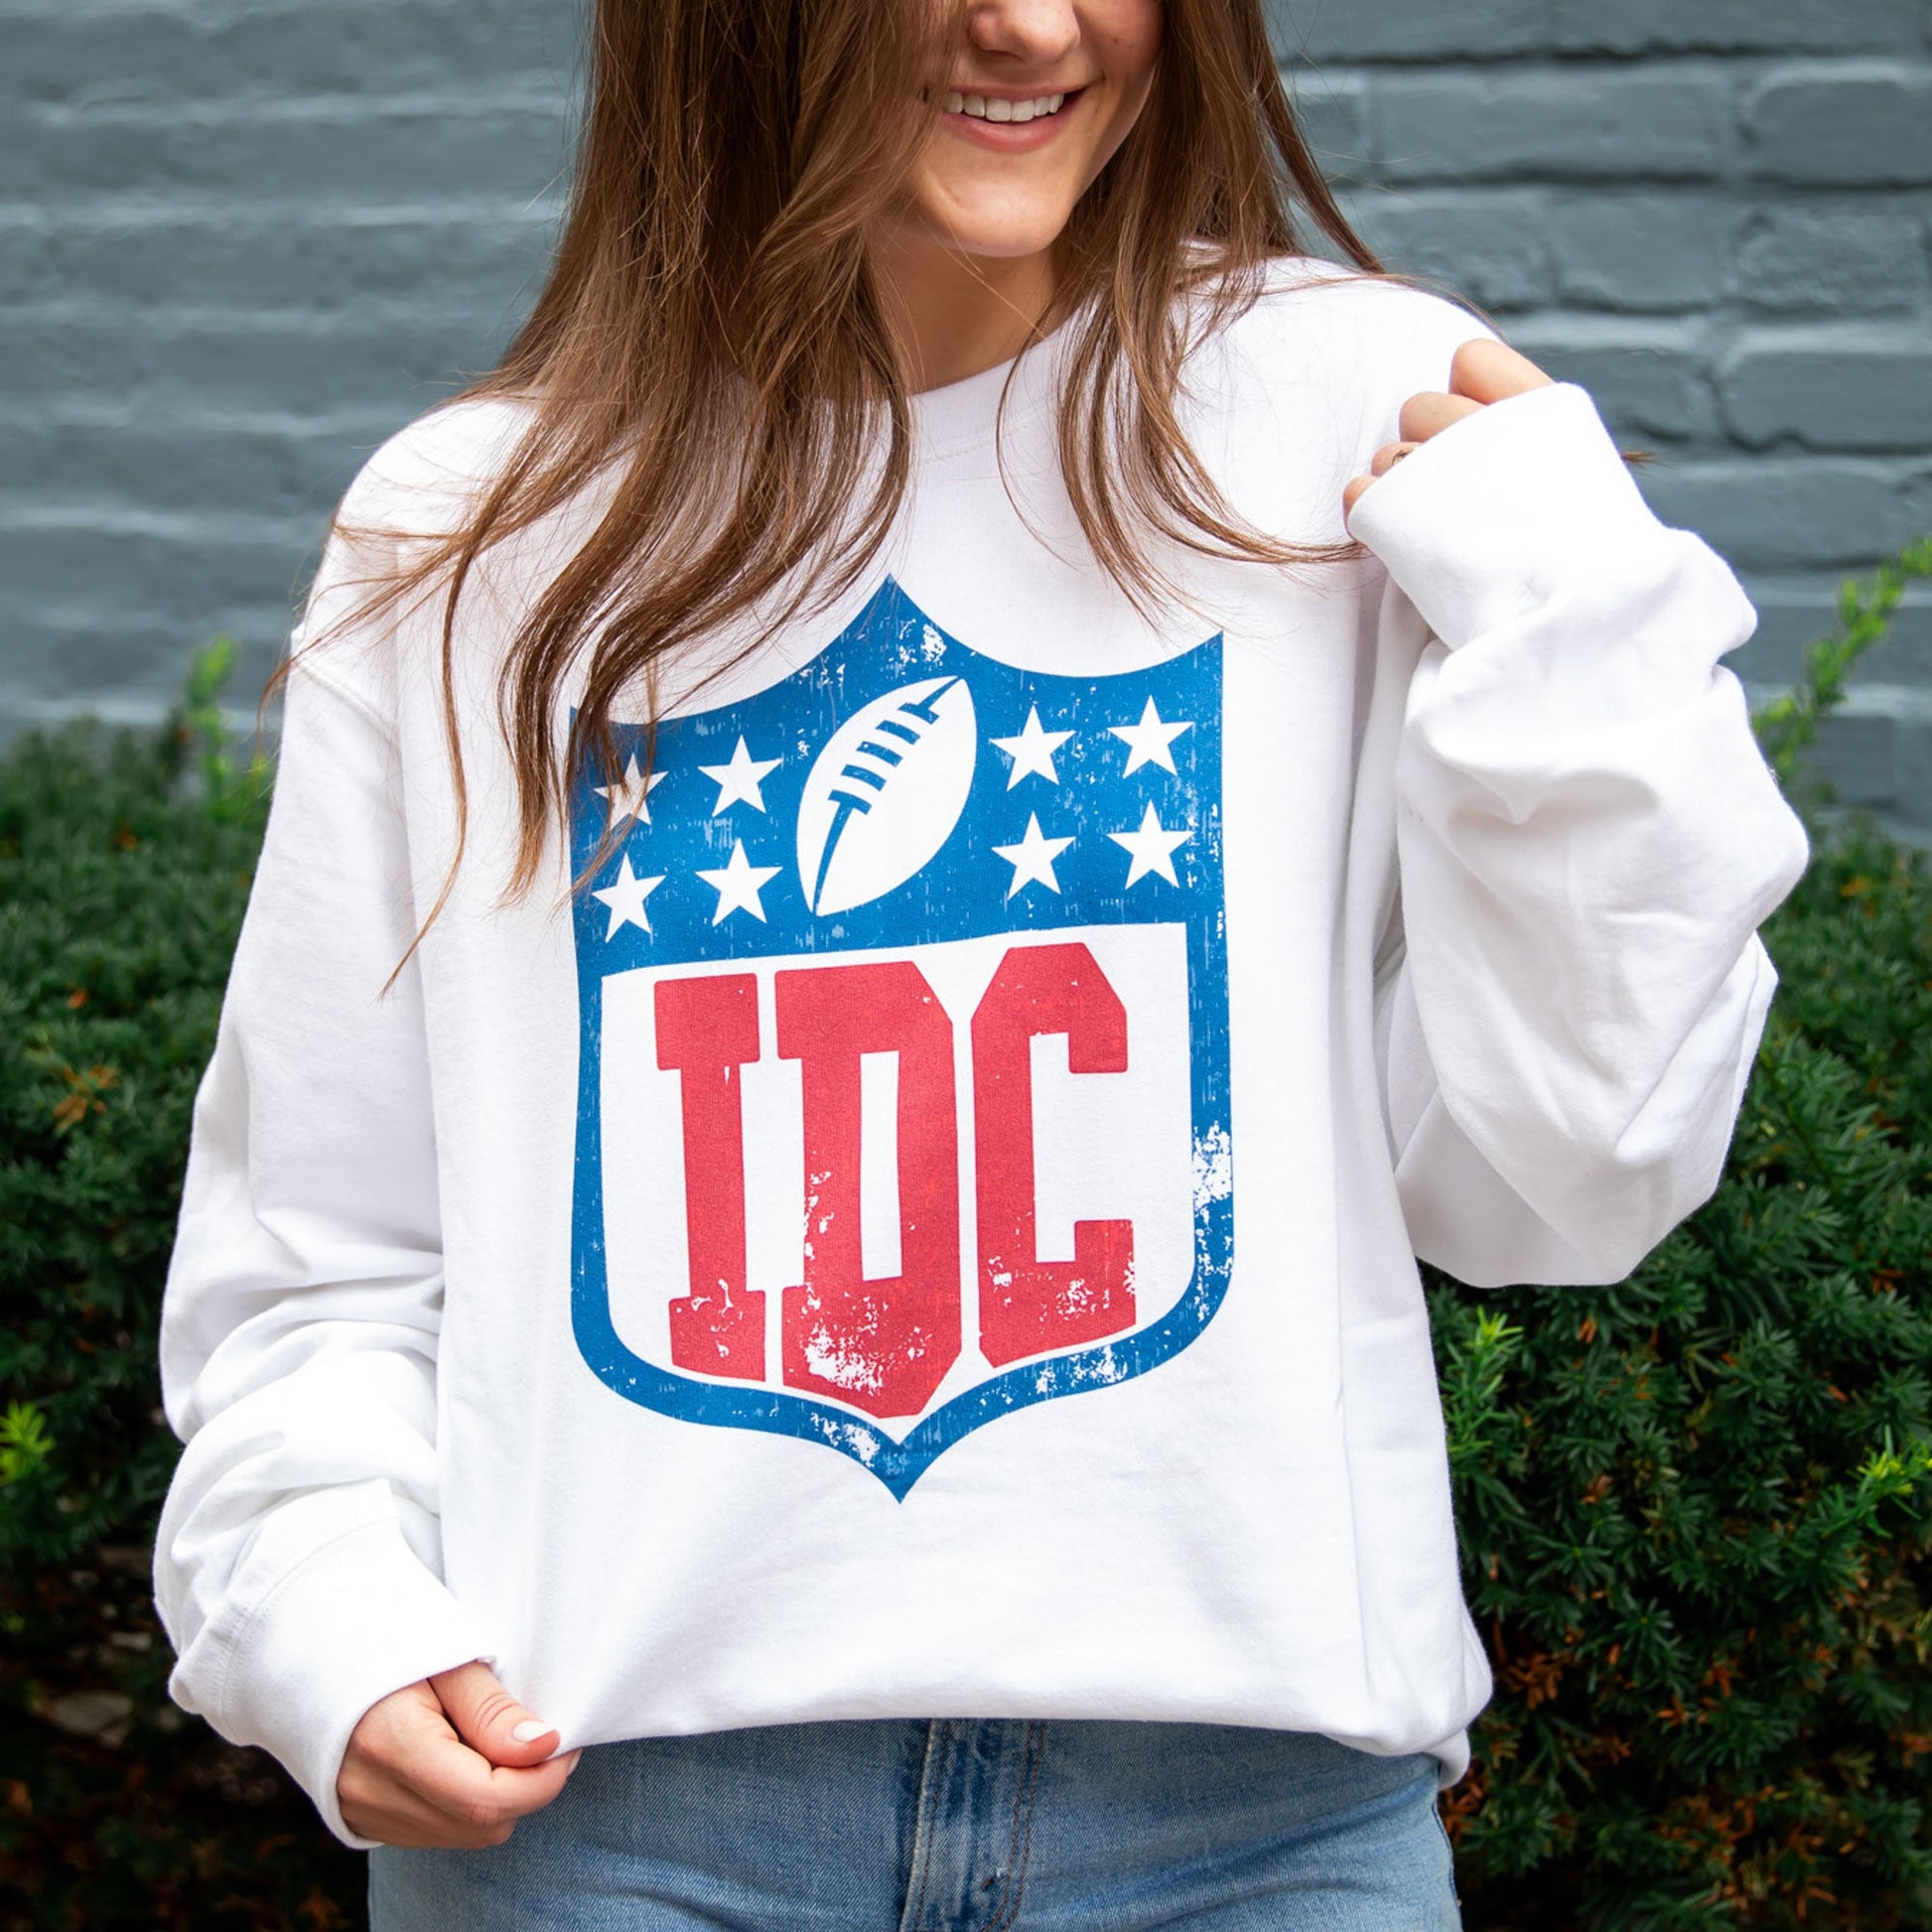 woman wearing oversized white crewneck sweatshirt with an idc printed logo on the front